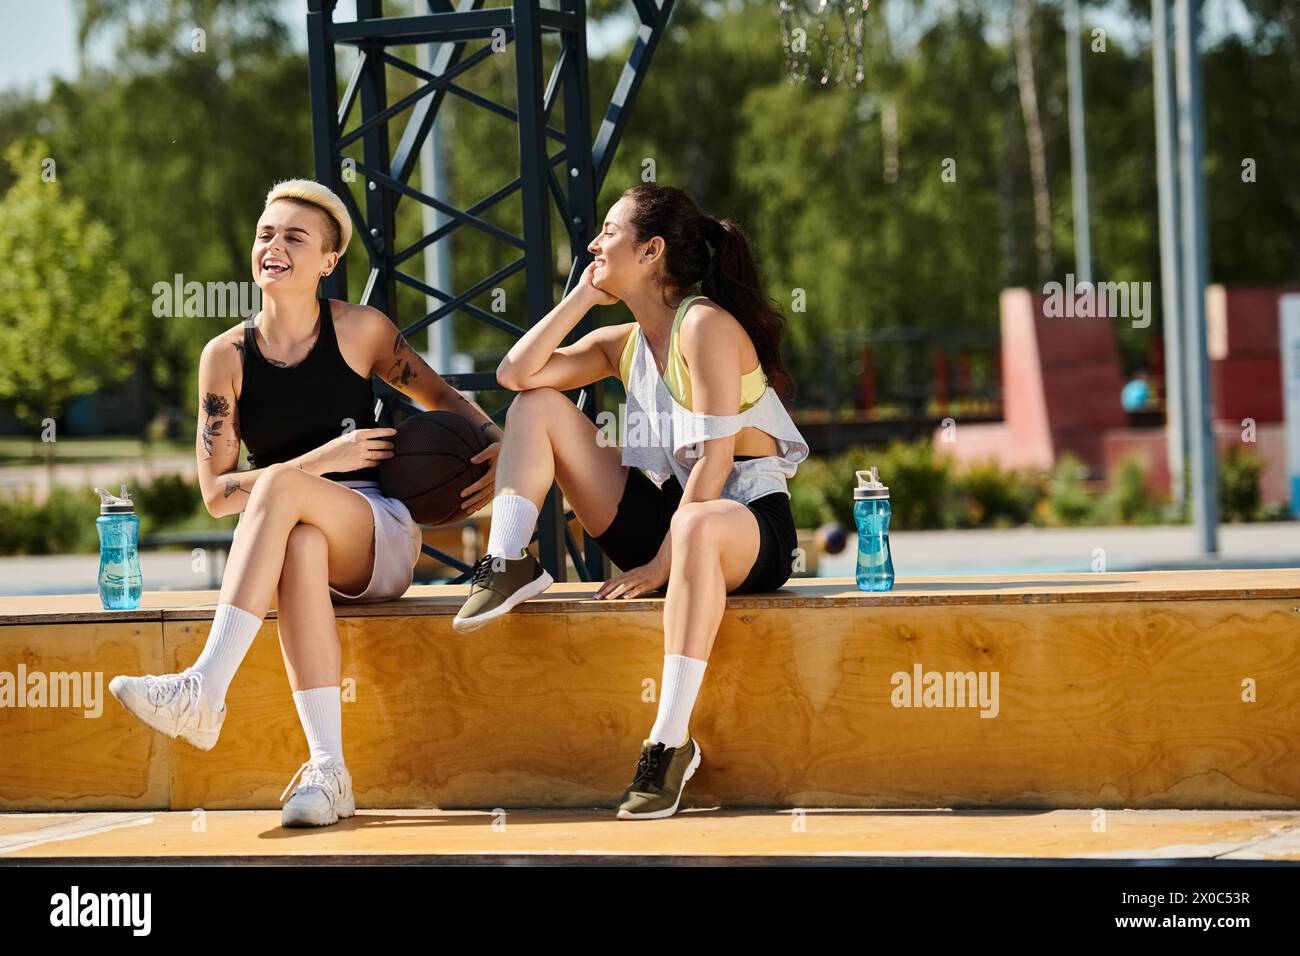 Two athletic young women sitting on a ledge, sharing a moment of joy and laughter while enjoying a summer day outdoors. Stock Photo